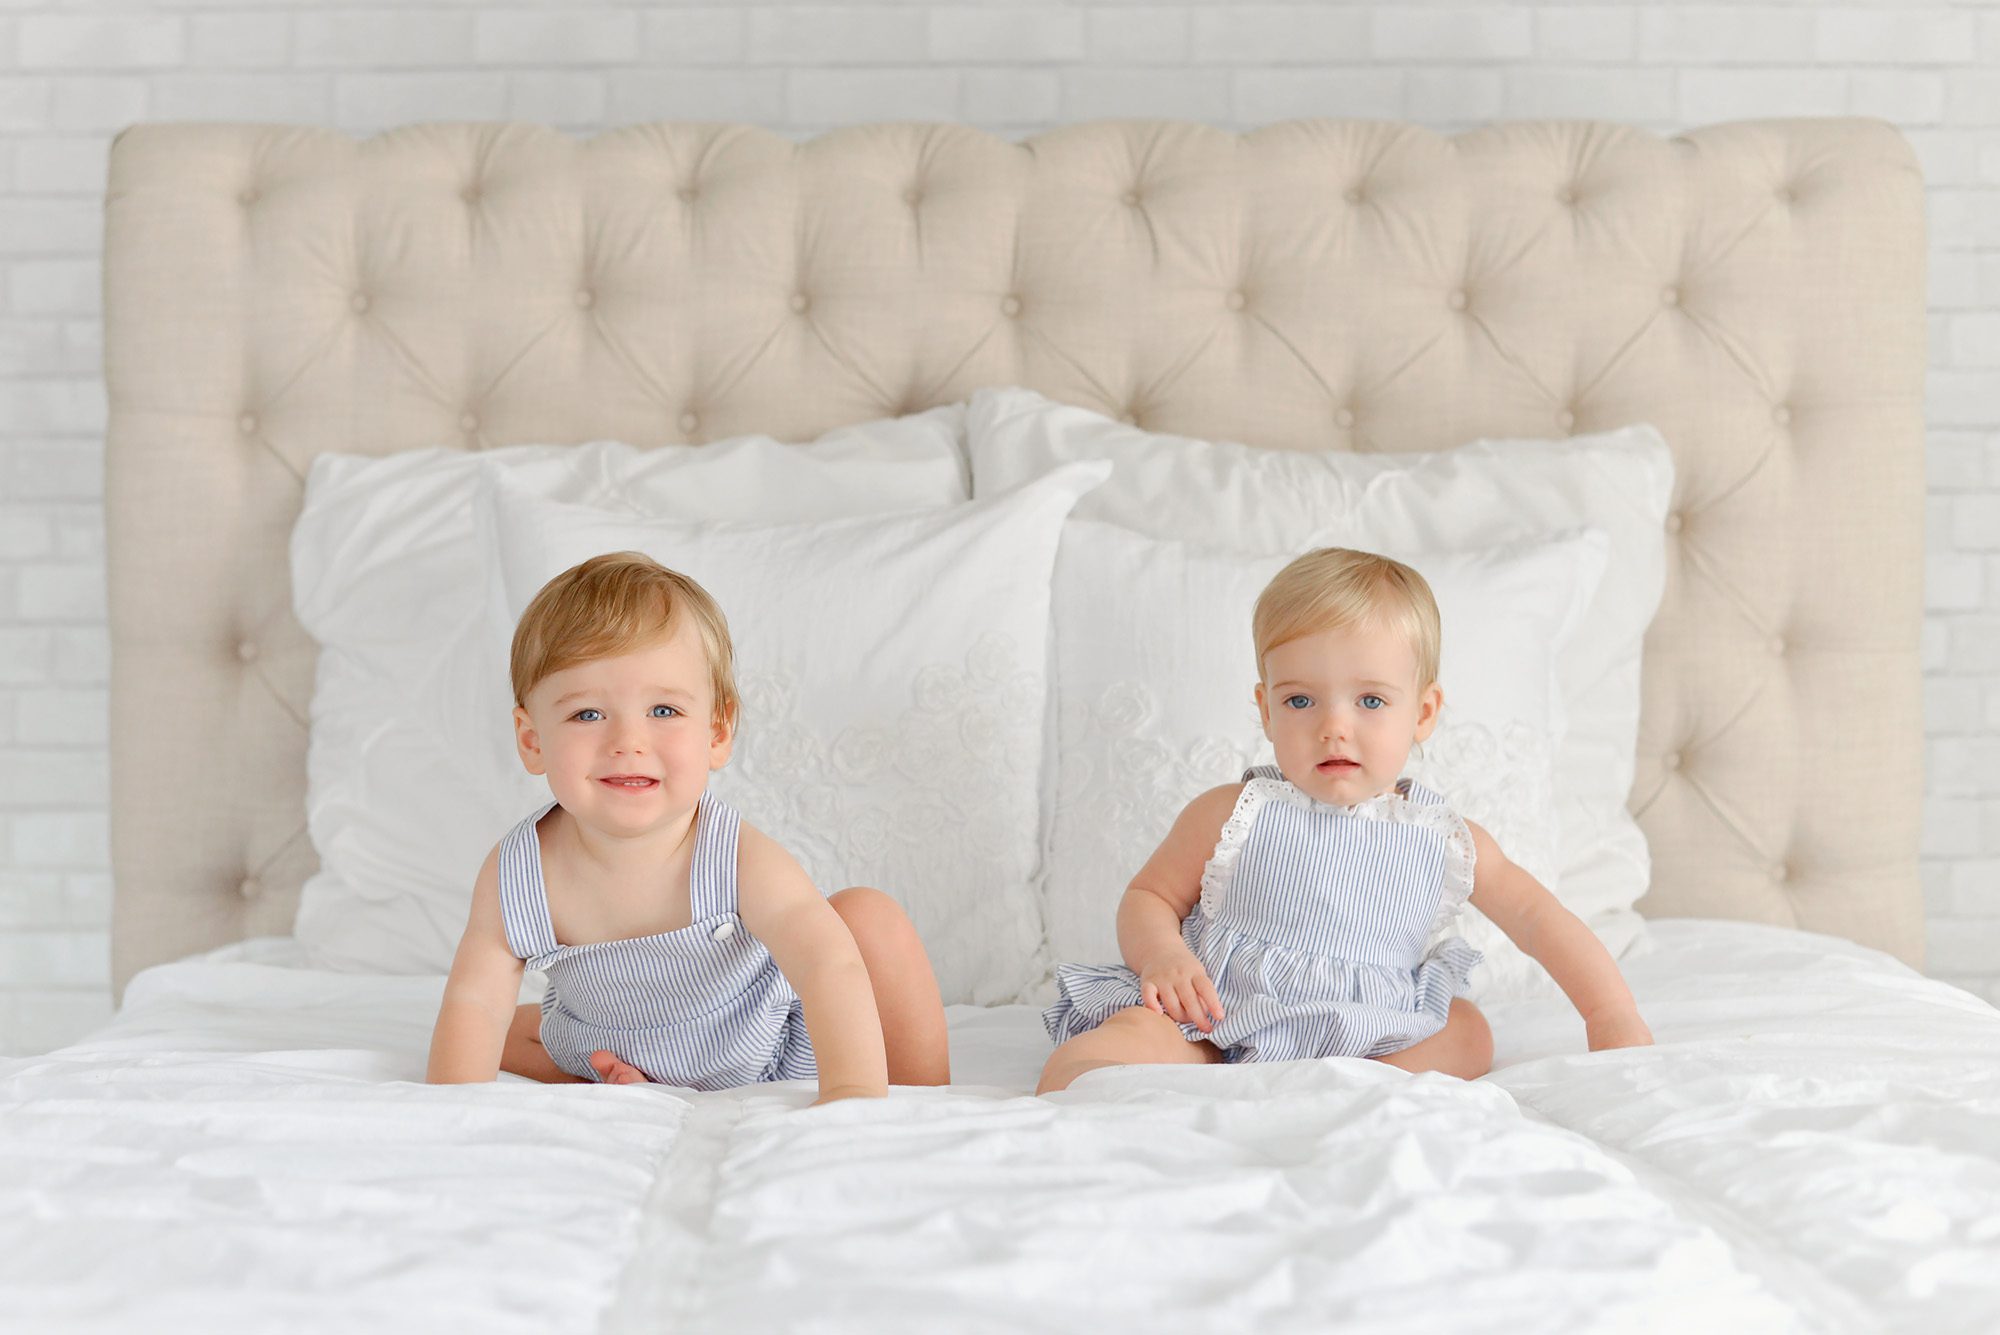 A set of blond haired blue eyed twins, one boy and one girl are being photographed in a white studio for their 1st birthday, which includes portraits and a cake smash at the end.